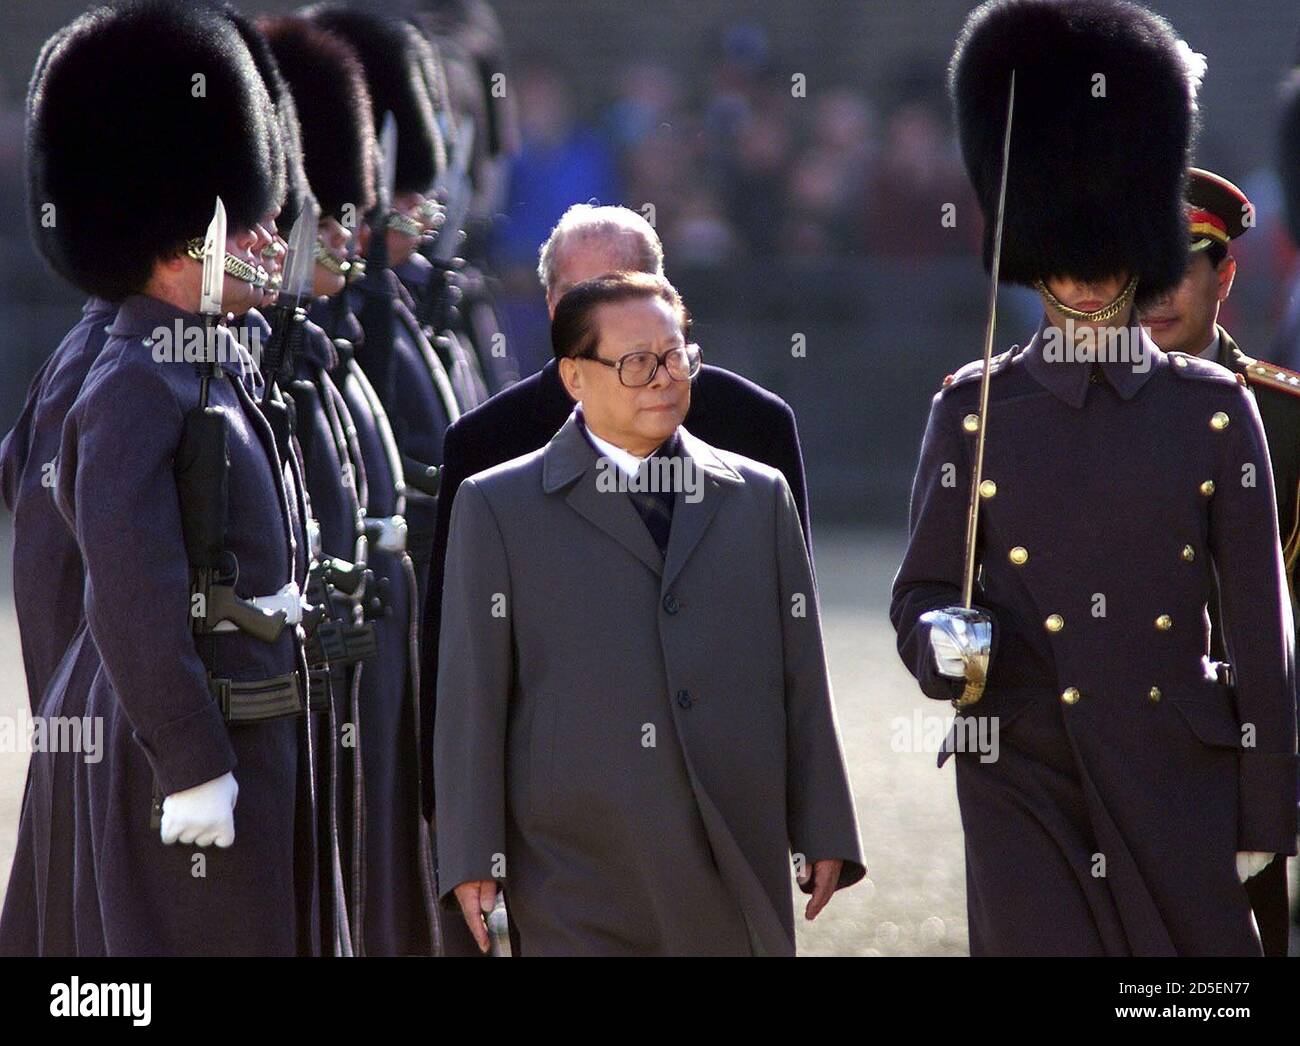 China's President Jiang Zemin is escorted by Prince Philip (obscured) as he inspects a guard of honour at the start of his state visit to Britain, October 19. Protestors including Tibetan independence activists and human rights campaigners have threatened to dog Jiang's visit, the first by a Chinese head of state.  PH/HP/NS Stock Photo